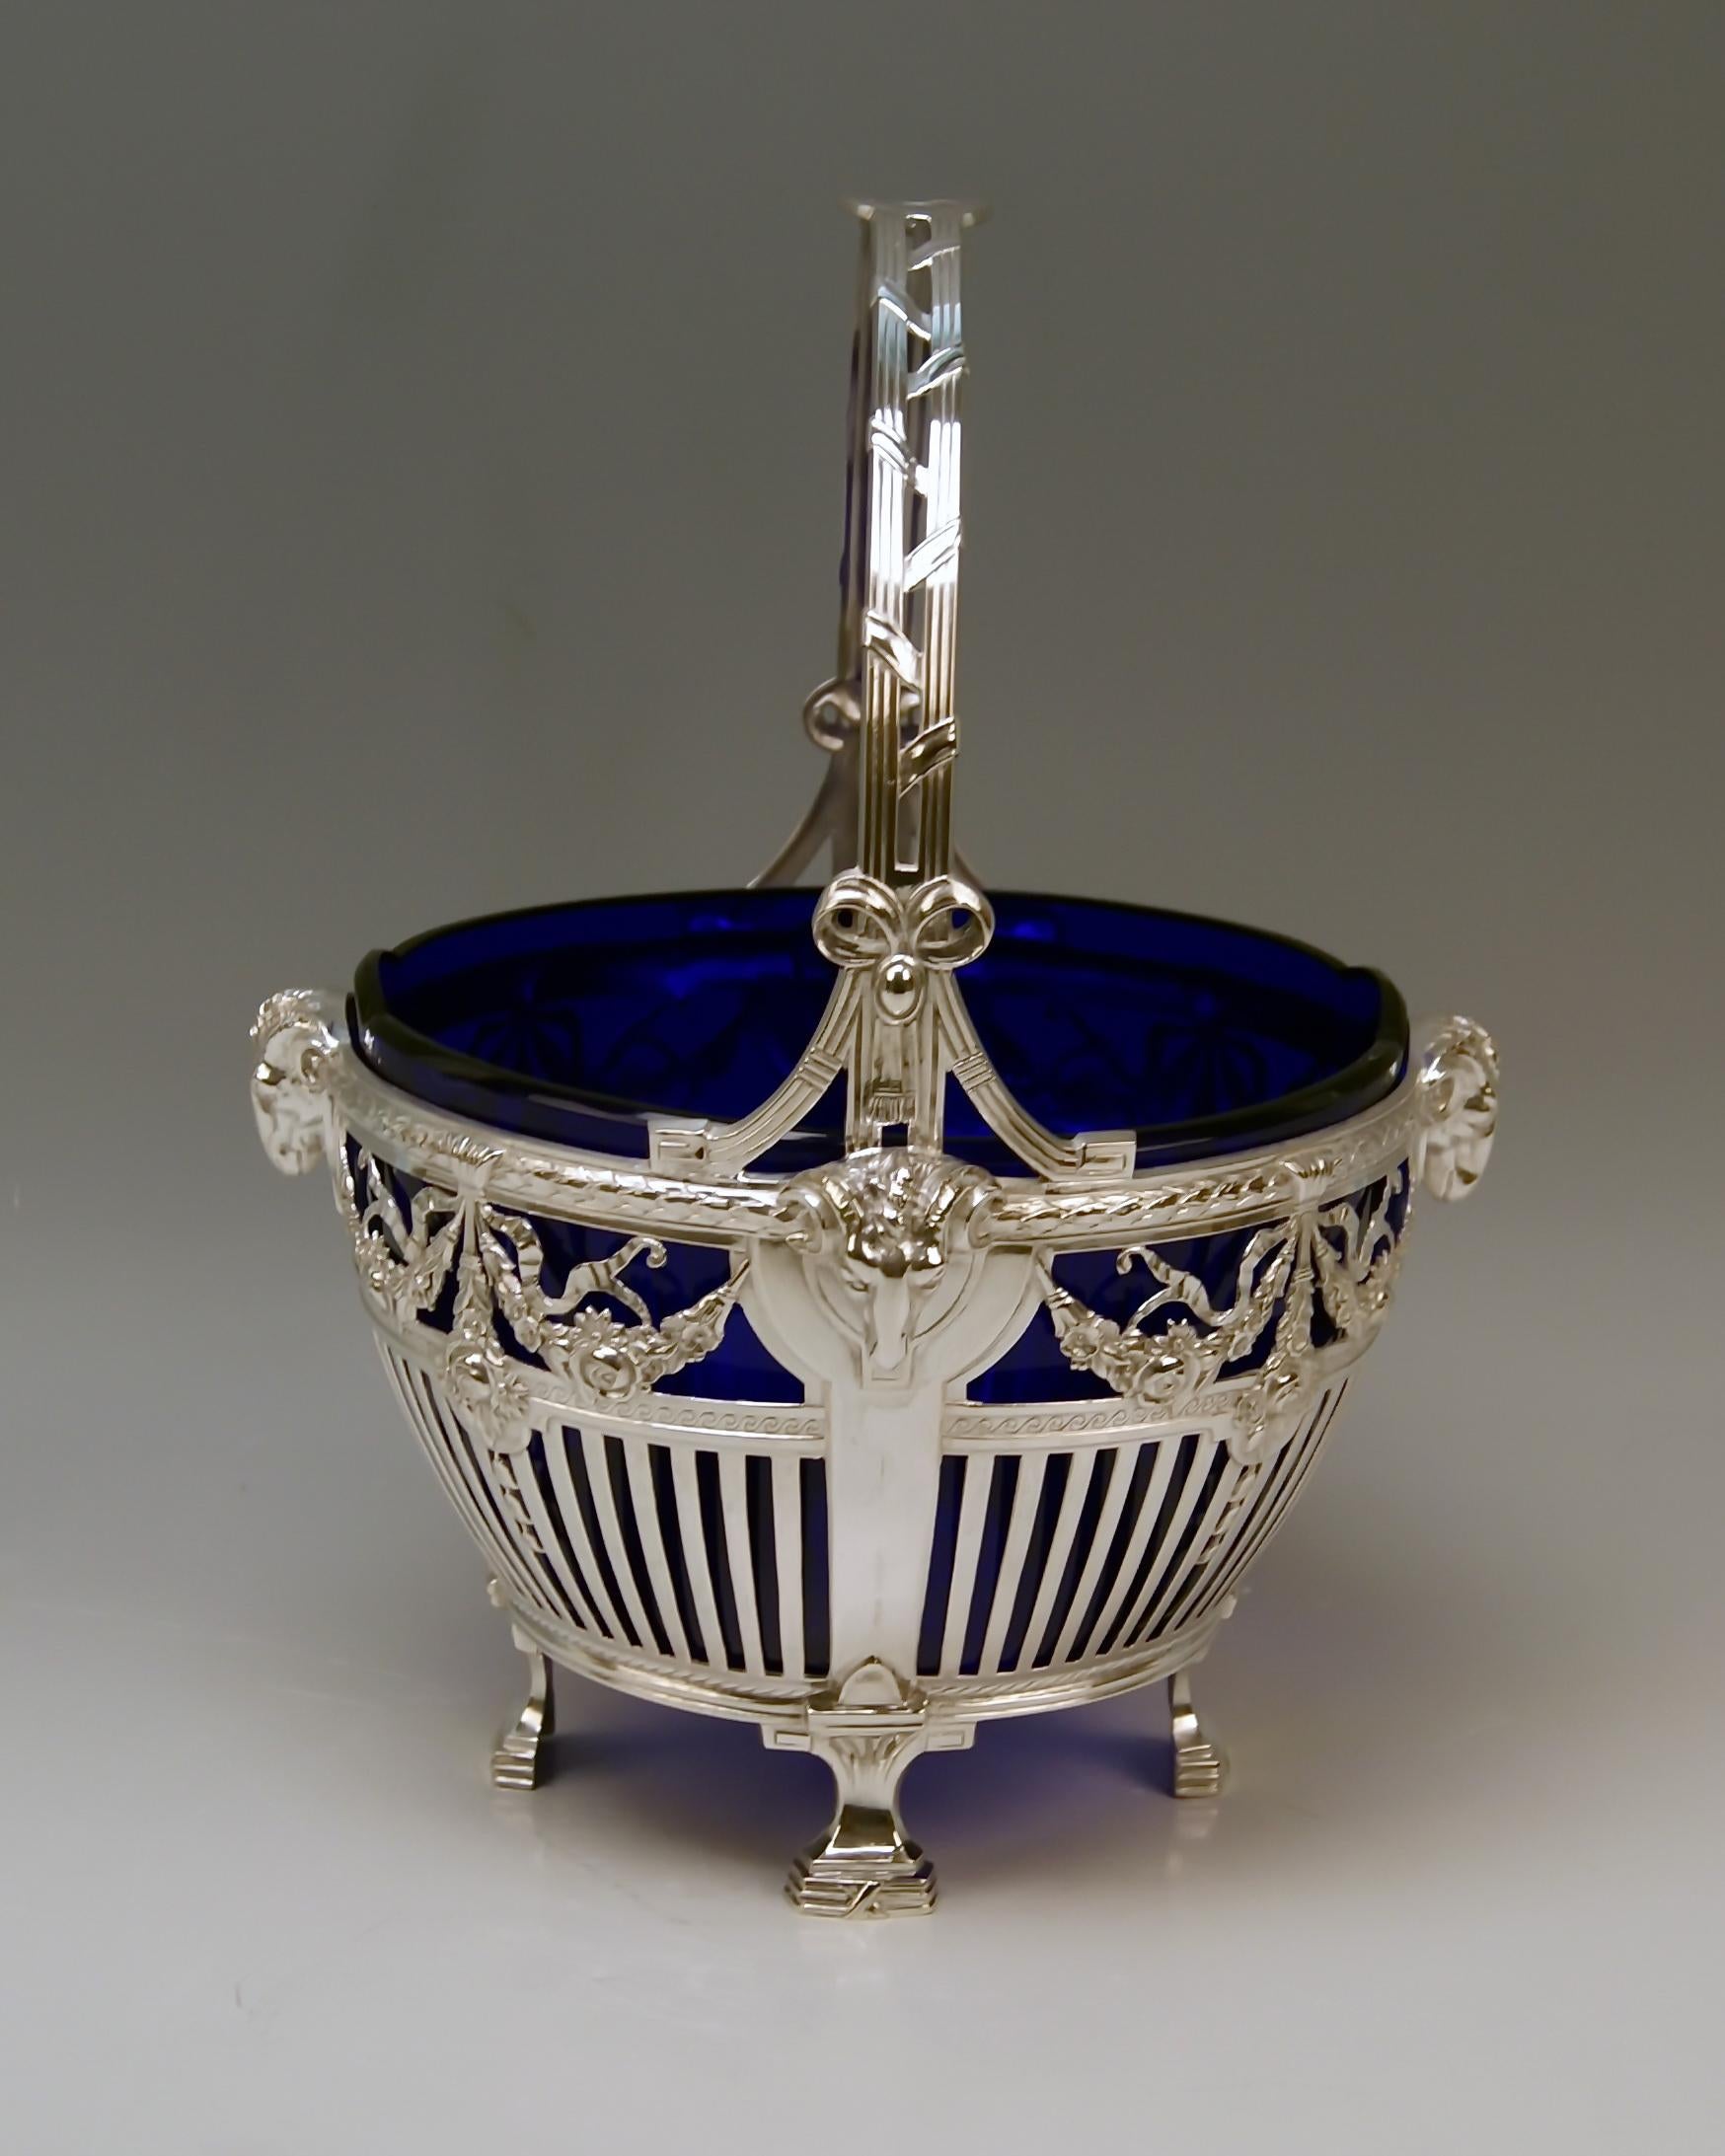 Gorgeous Art Nouveau Silver 800 basket with handle and original cobalt blue glass liner.

Made in Germany/ Bremer Silberwarenfabrik, circa 1905-1910
As from year 1905 Bremer Silberwaren-Fabrik used the figural 